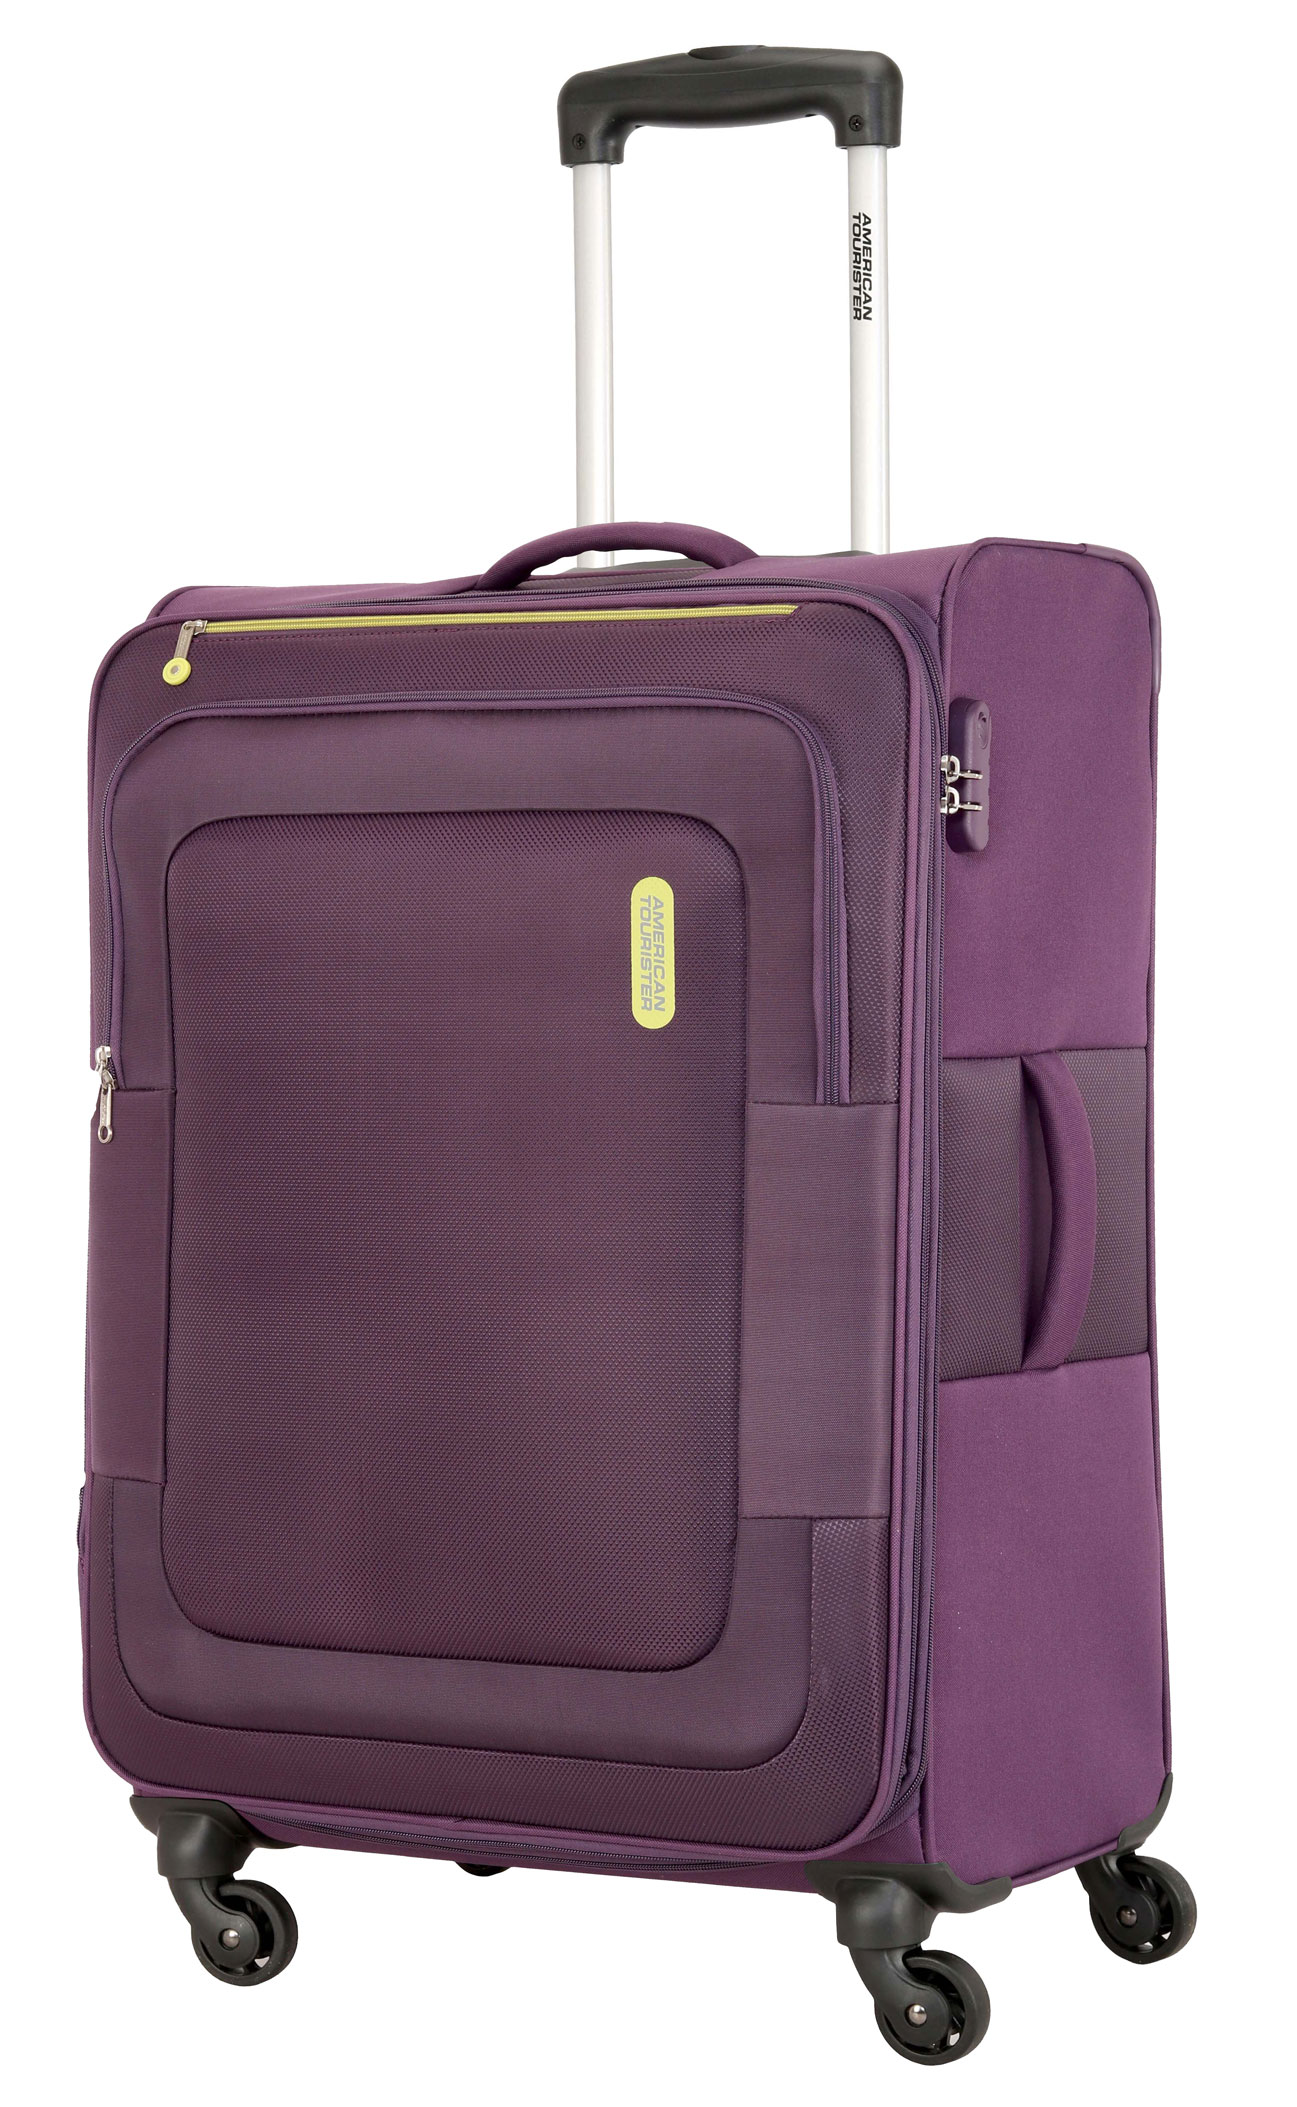 Buy Top Rated Travel Bags and Luggage Sets- American Tourister